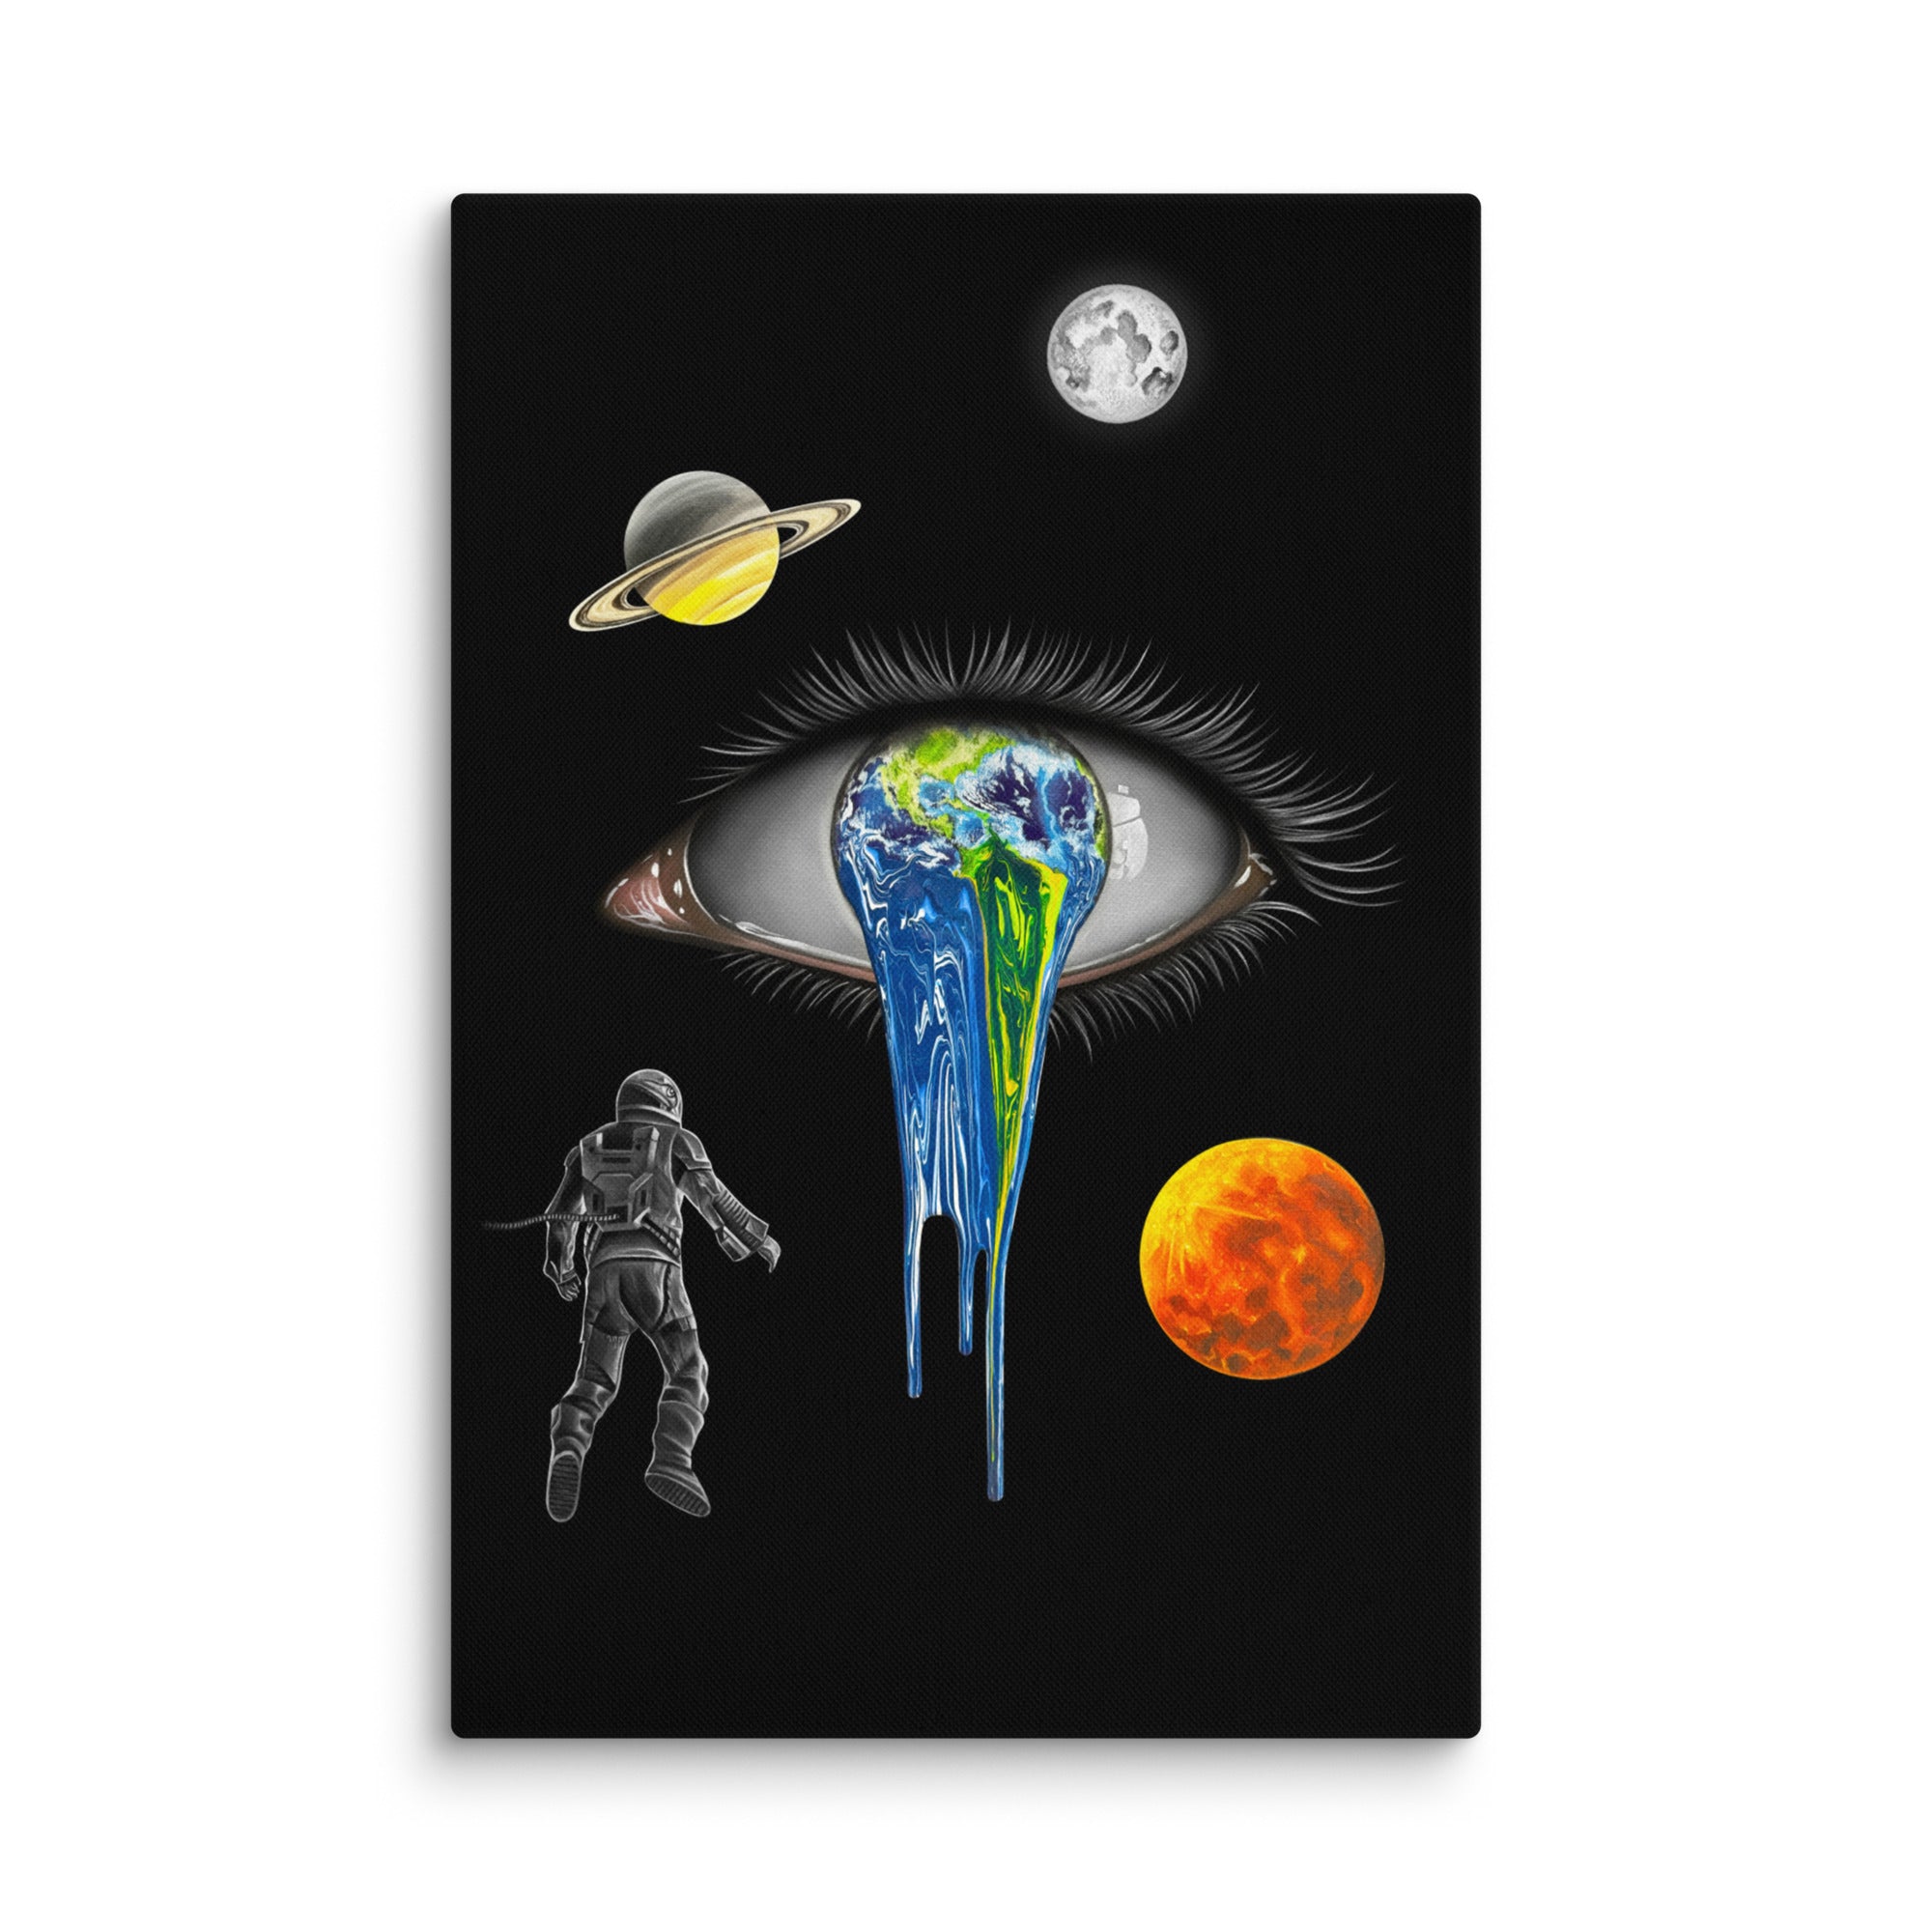 Mother Nature Canvas Print